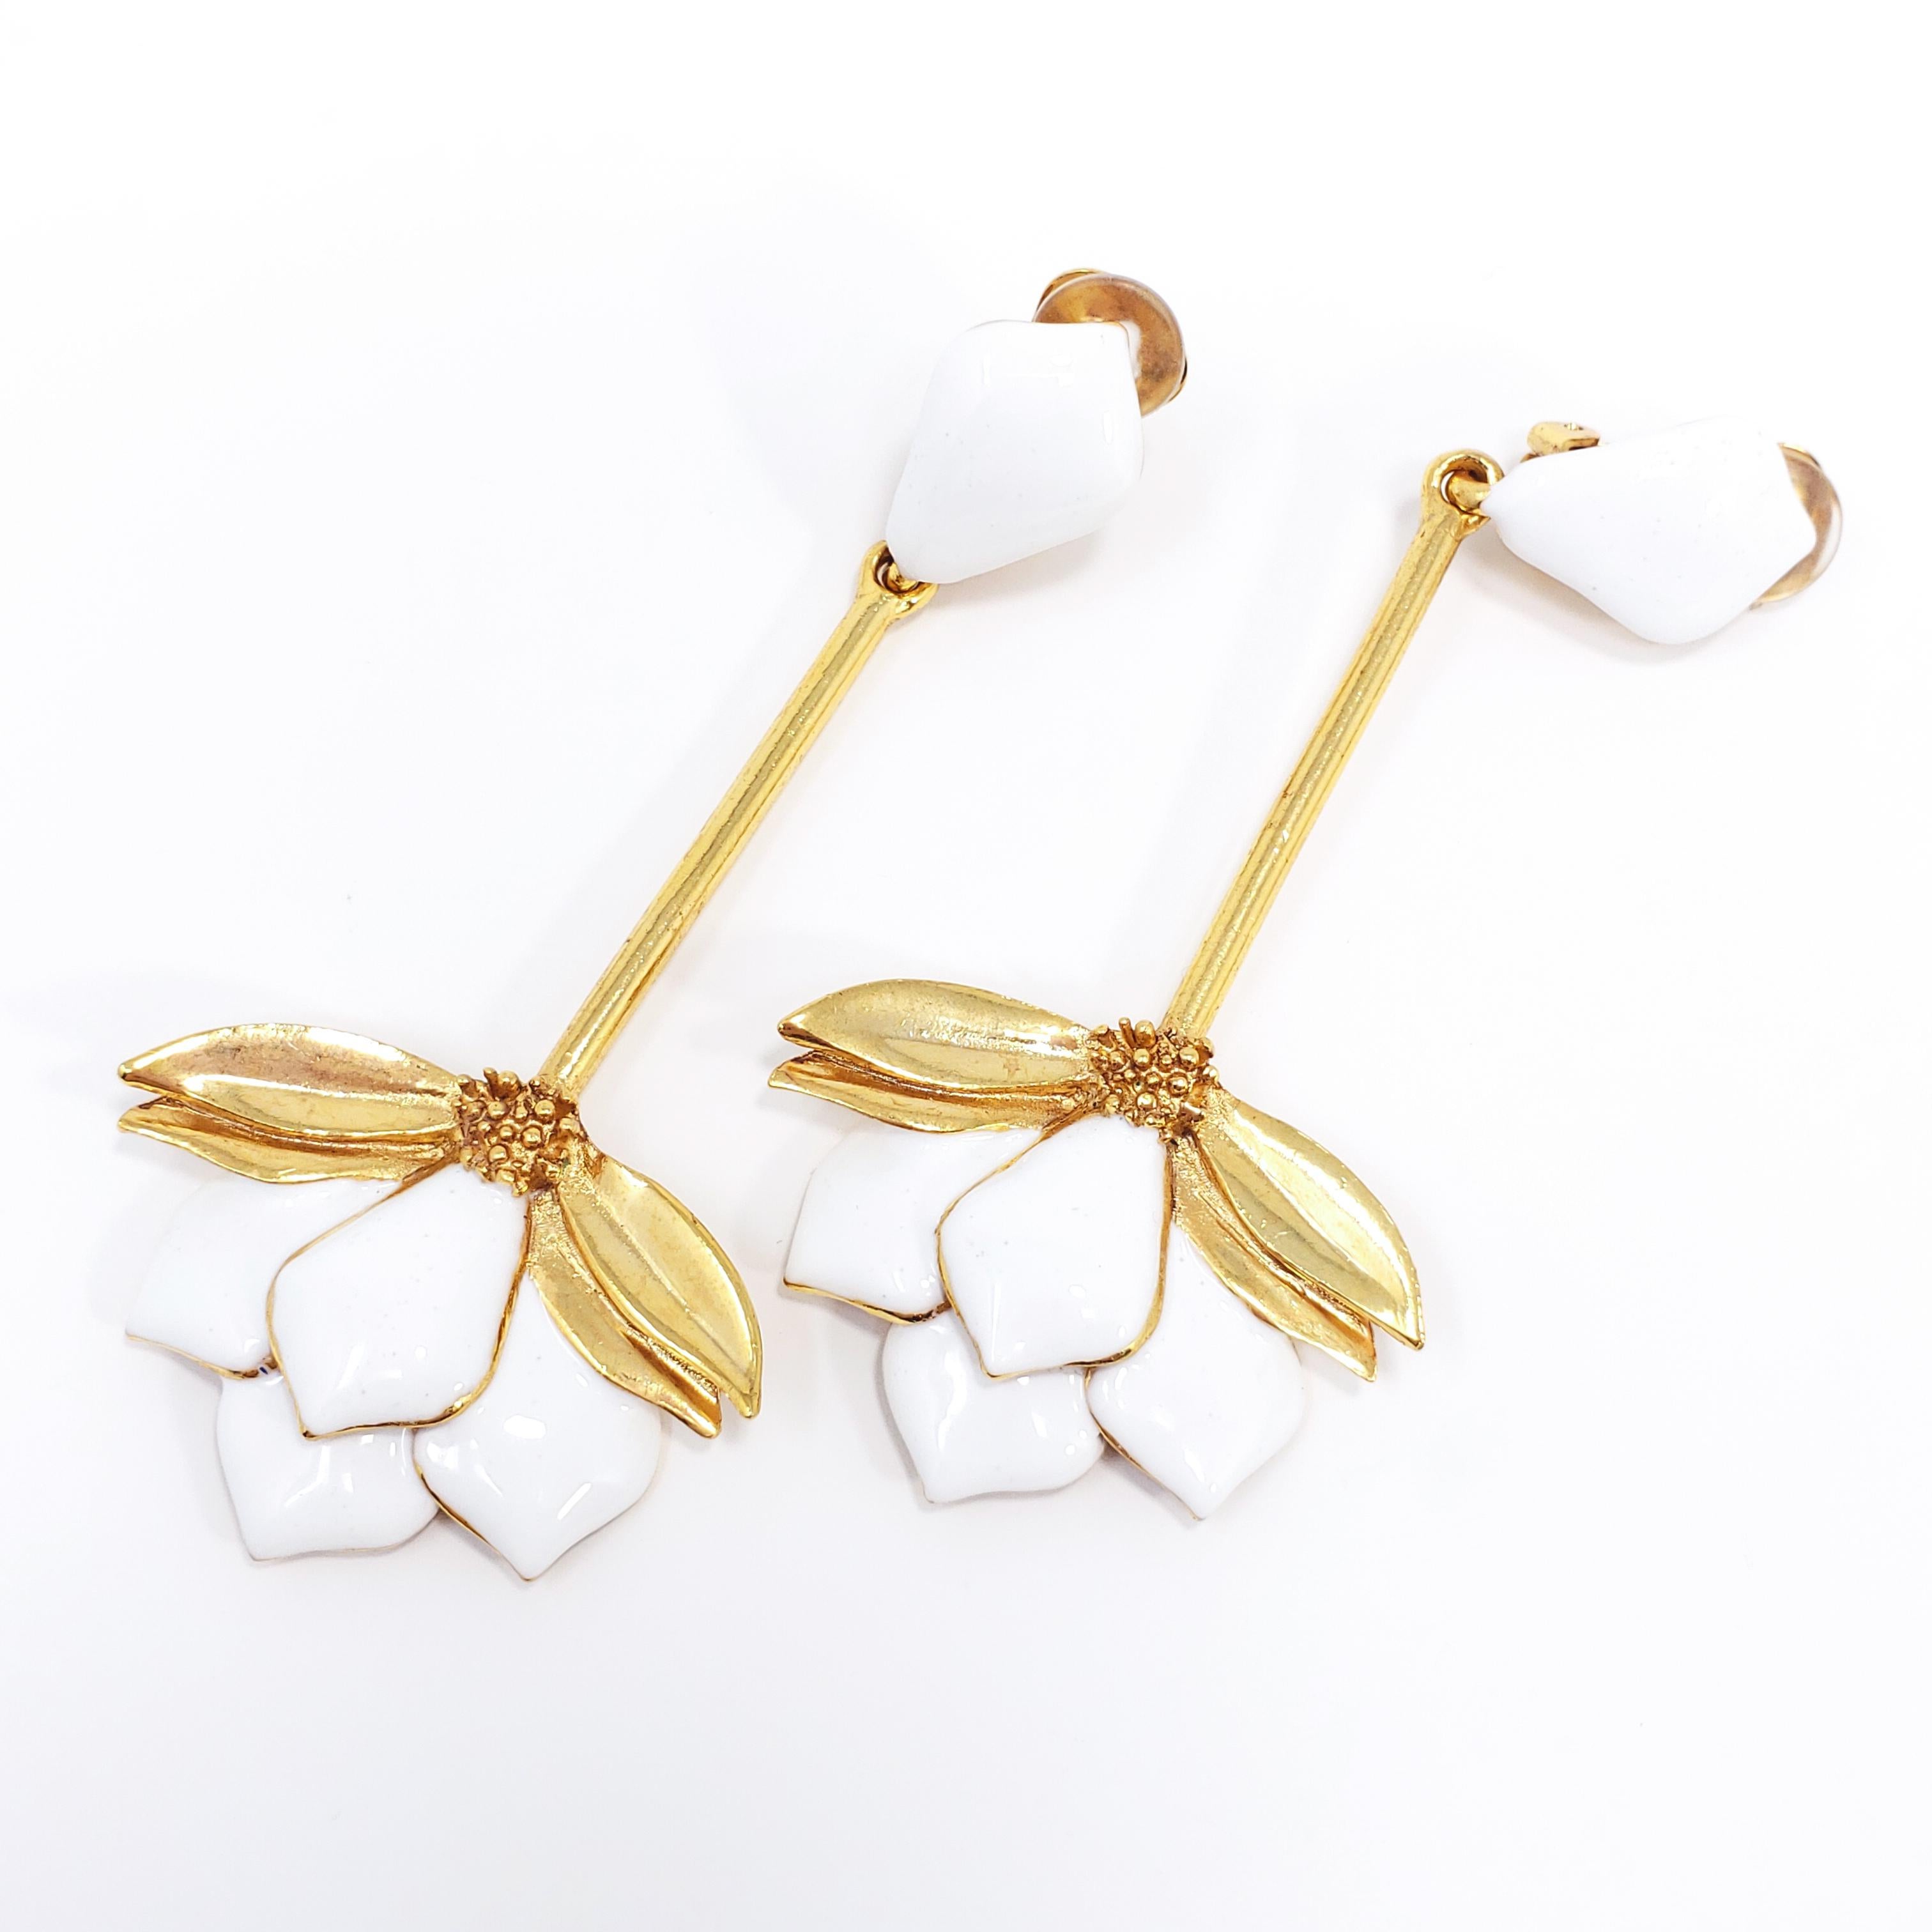 A pair of extravagant earrings, each featuring a clip on in white enamel, with a dangling long stem and gold plated, white-enameled flower, accented with golden floral motifs.

Hallmarks: Oscar de la Renta, Made in USA